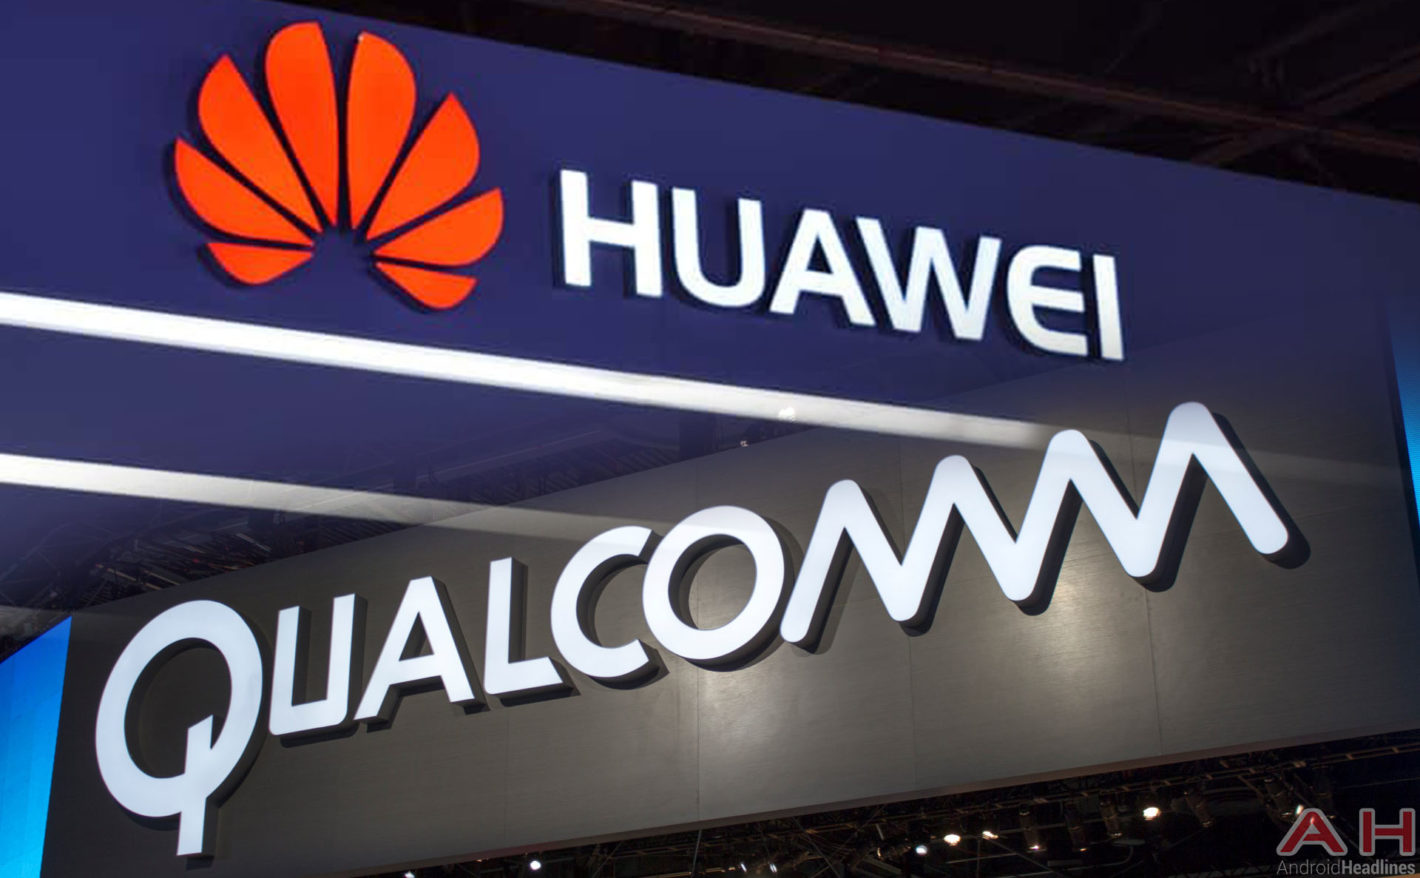 Qualcomm recommences chipset business with Huawei